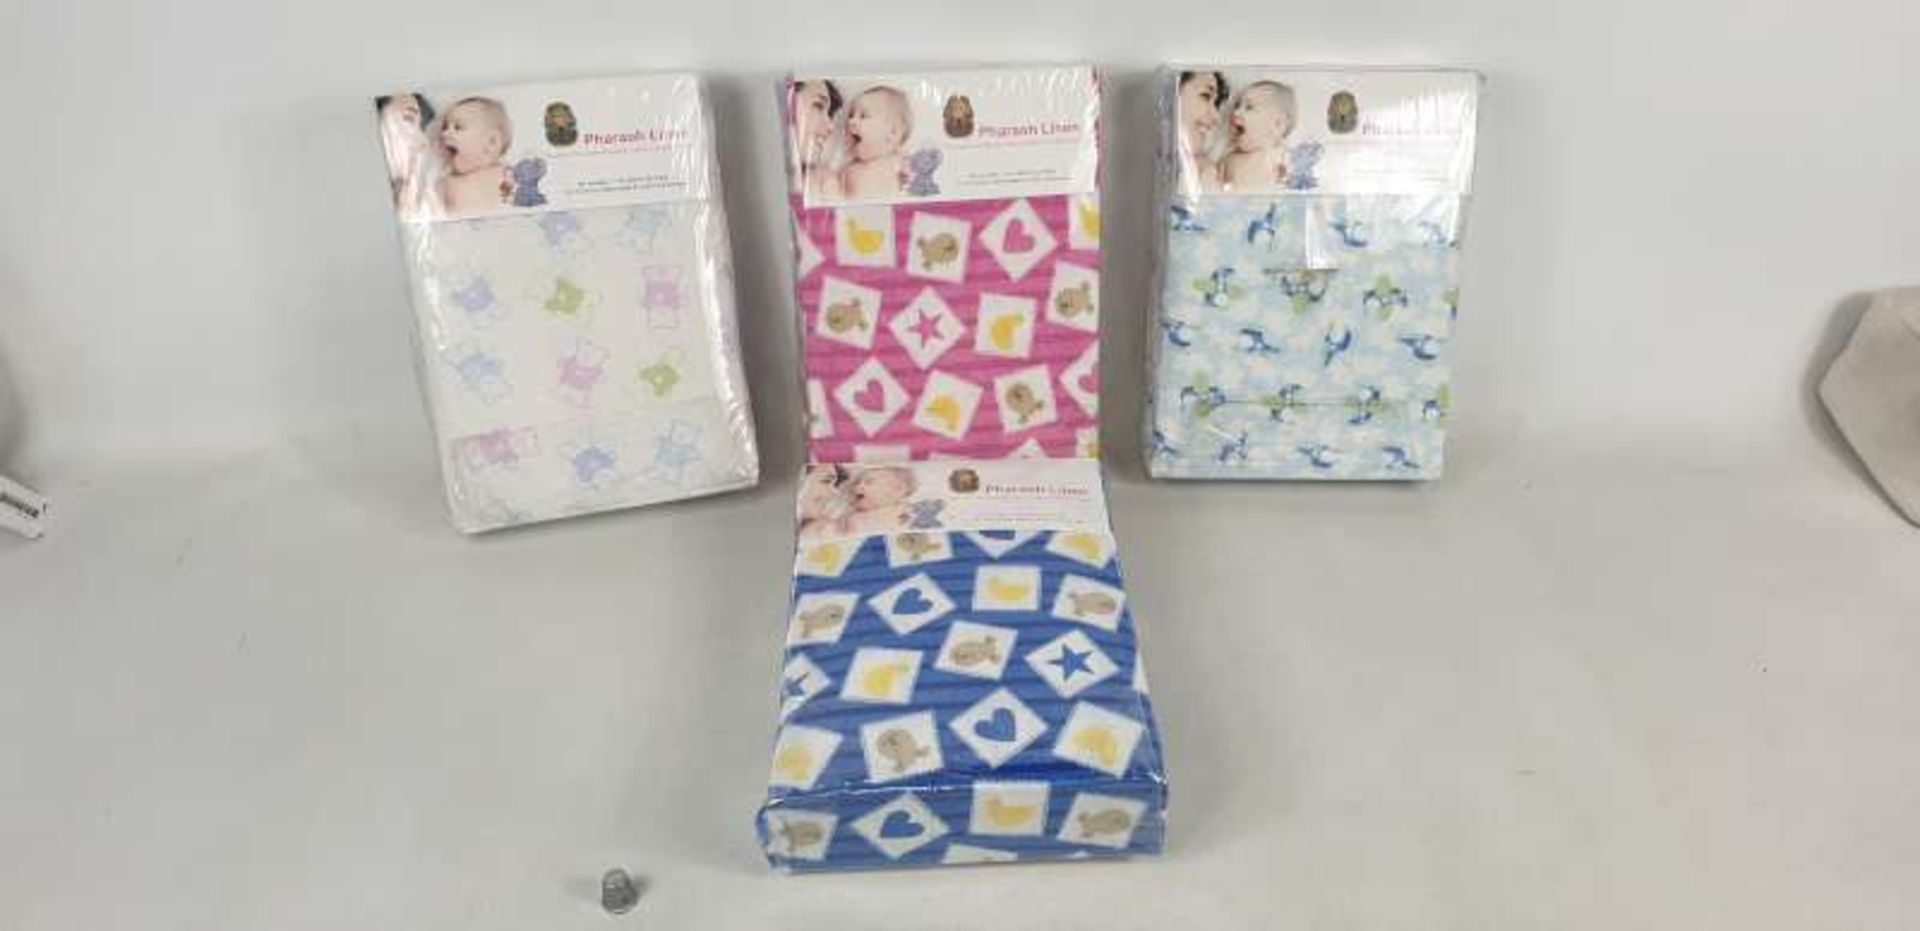 32 X PHARAOH LINEN THERMAL FLANNETTE BRUSHED COTTON COT SHEET SETS, EACH SET CONTAINS FLAT SHEET /